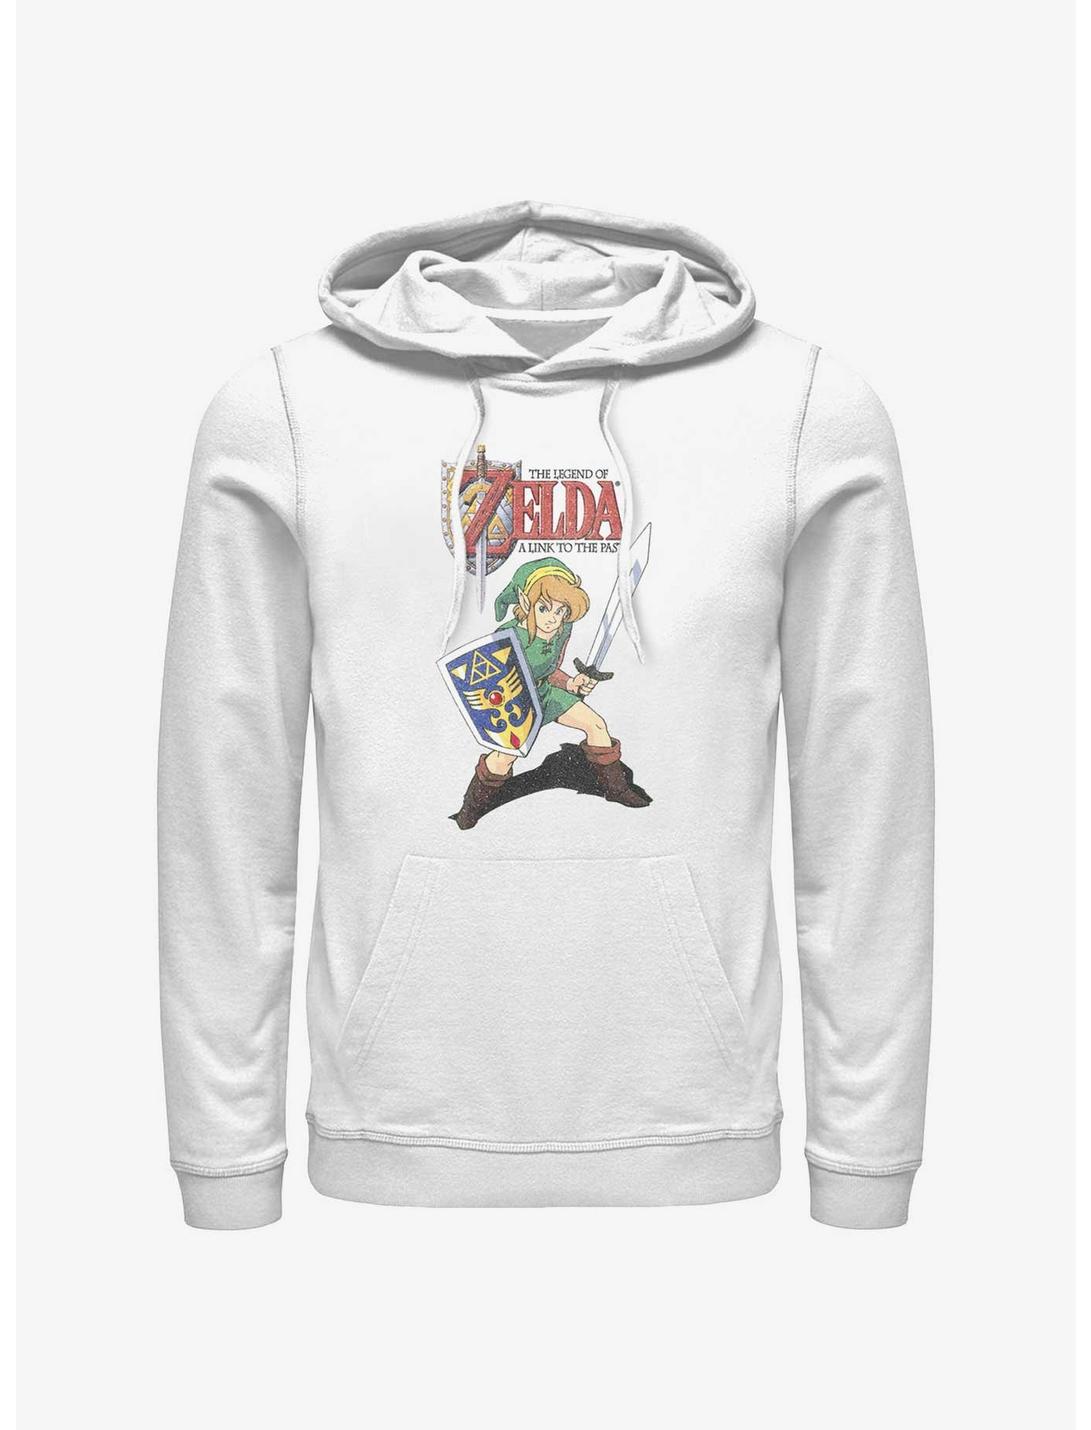 Nintendo The Legend of Zelda A Link To The Past Hoodie, WHITE, hi-res